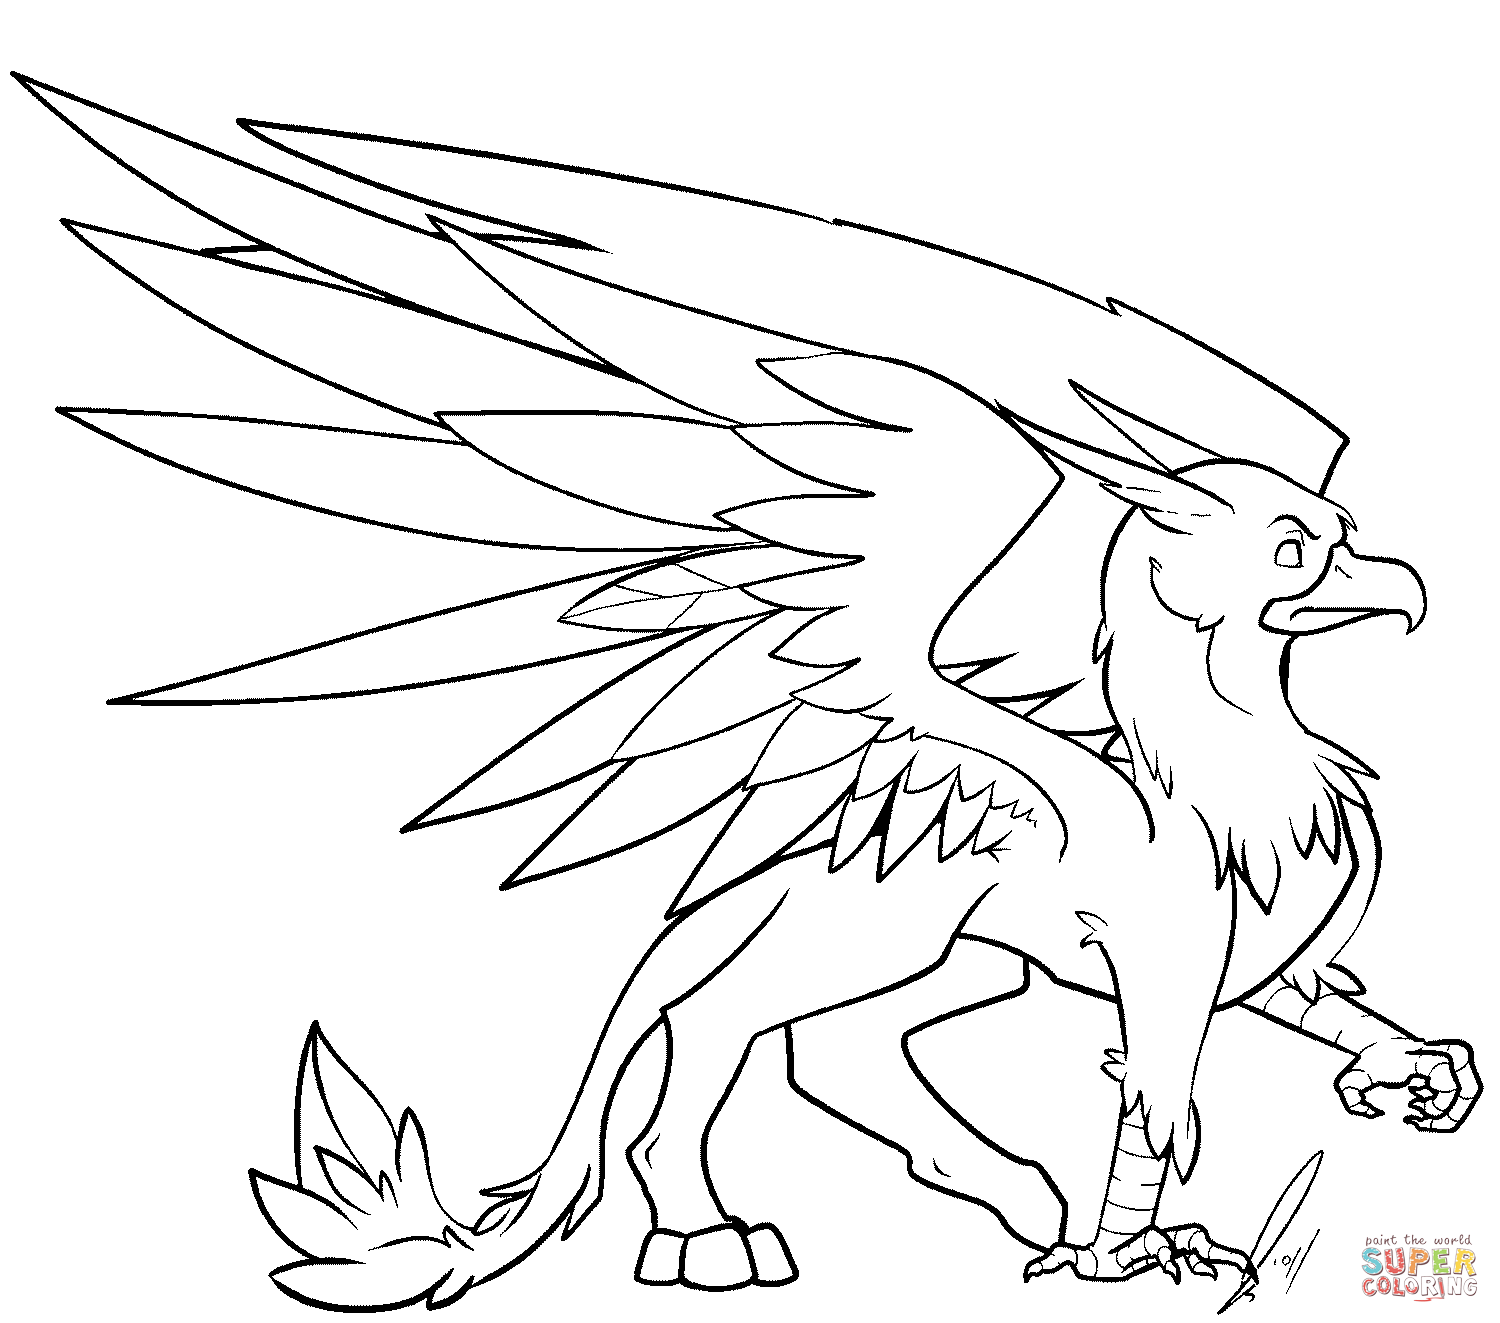 Gryphon coloring #4, Download drawings